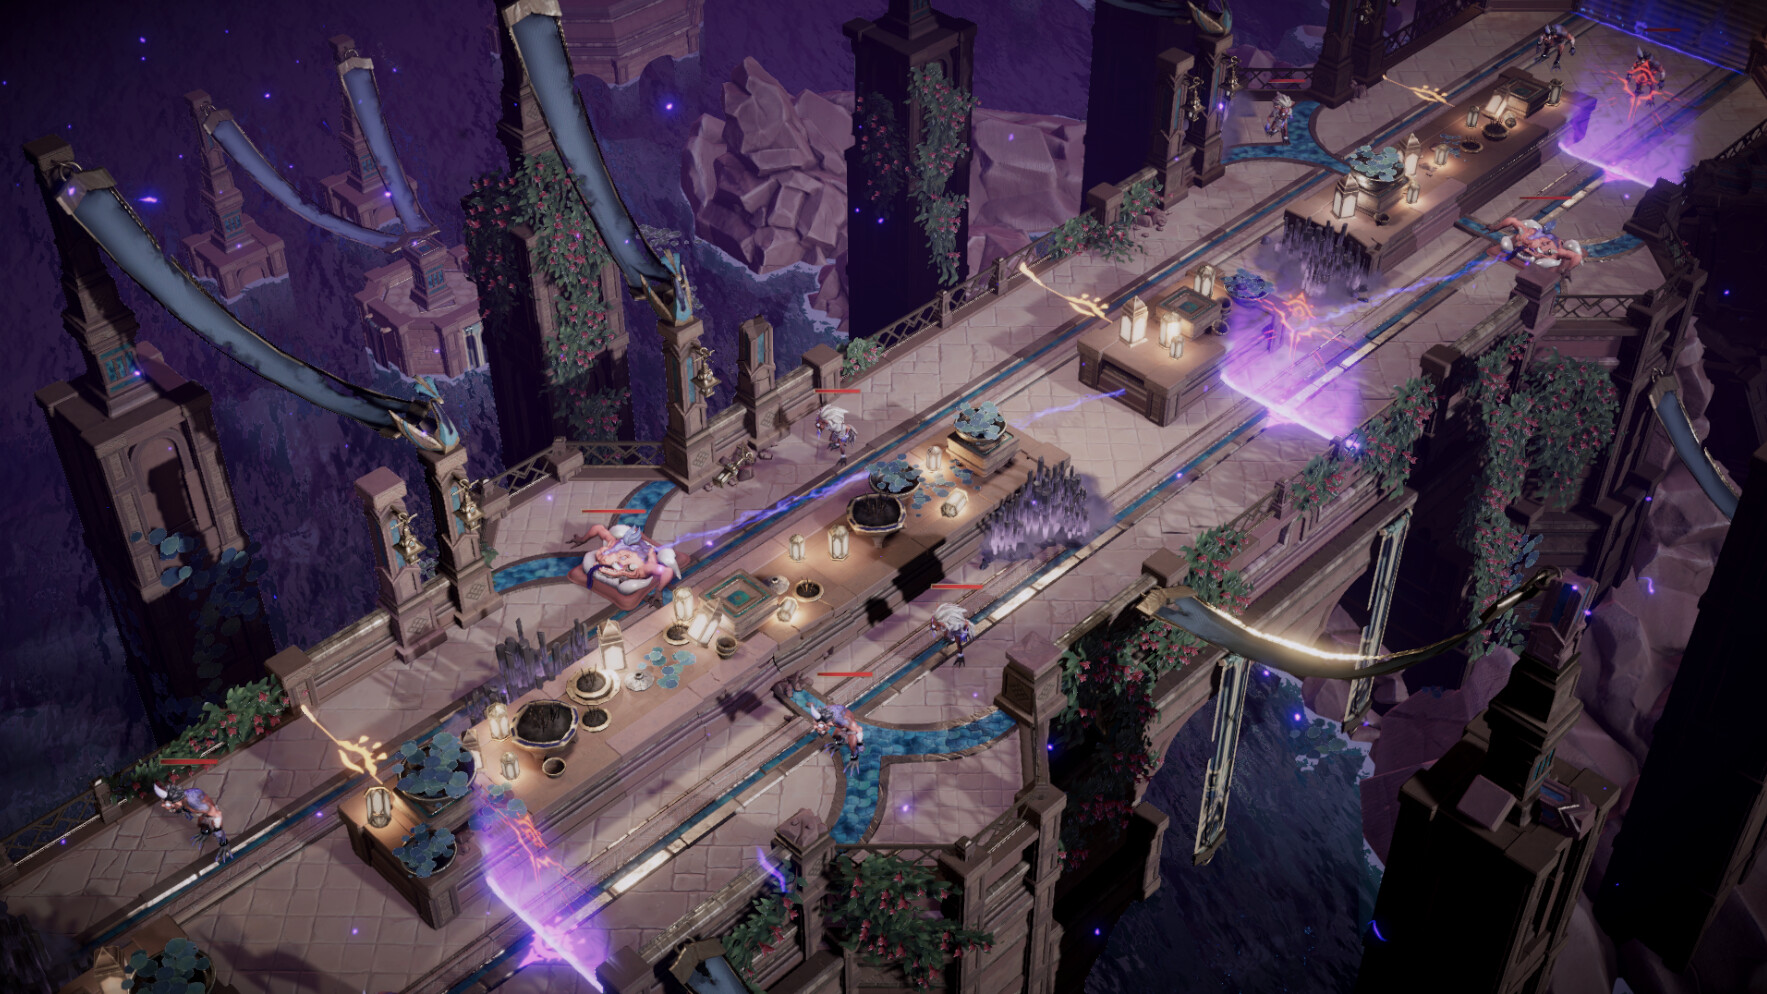 A bridge full of enemies appears in Lysfanga: The Time Shift Warrior.